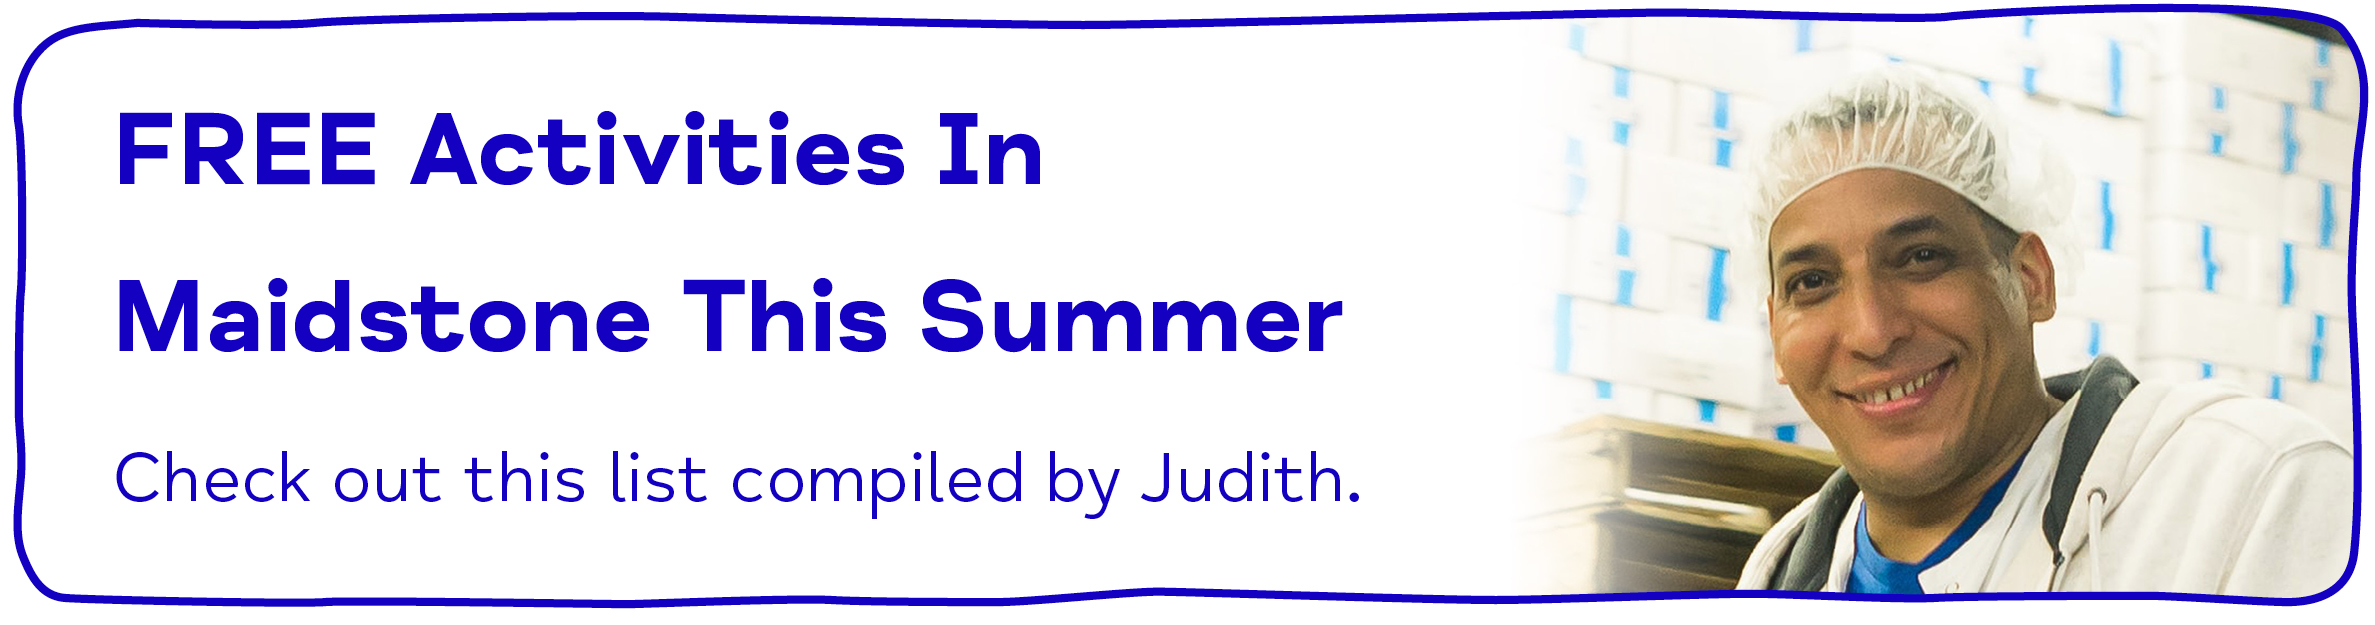 FREE Activities In Maidstone This Summer Check out this list compiled by Judith.